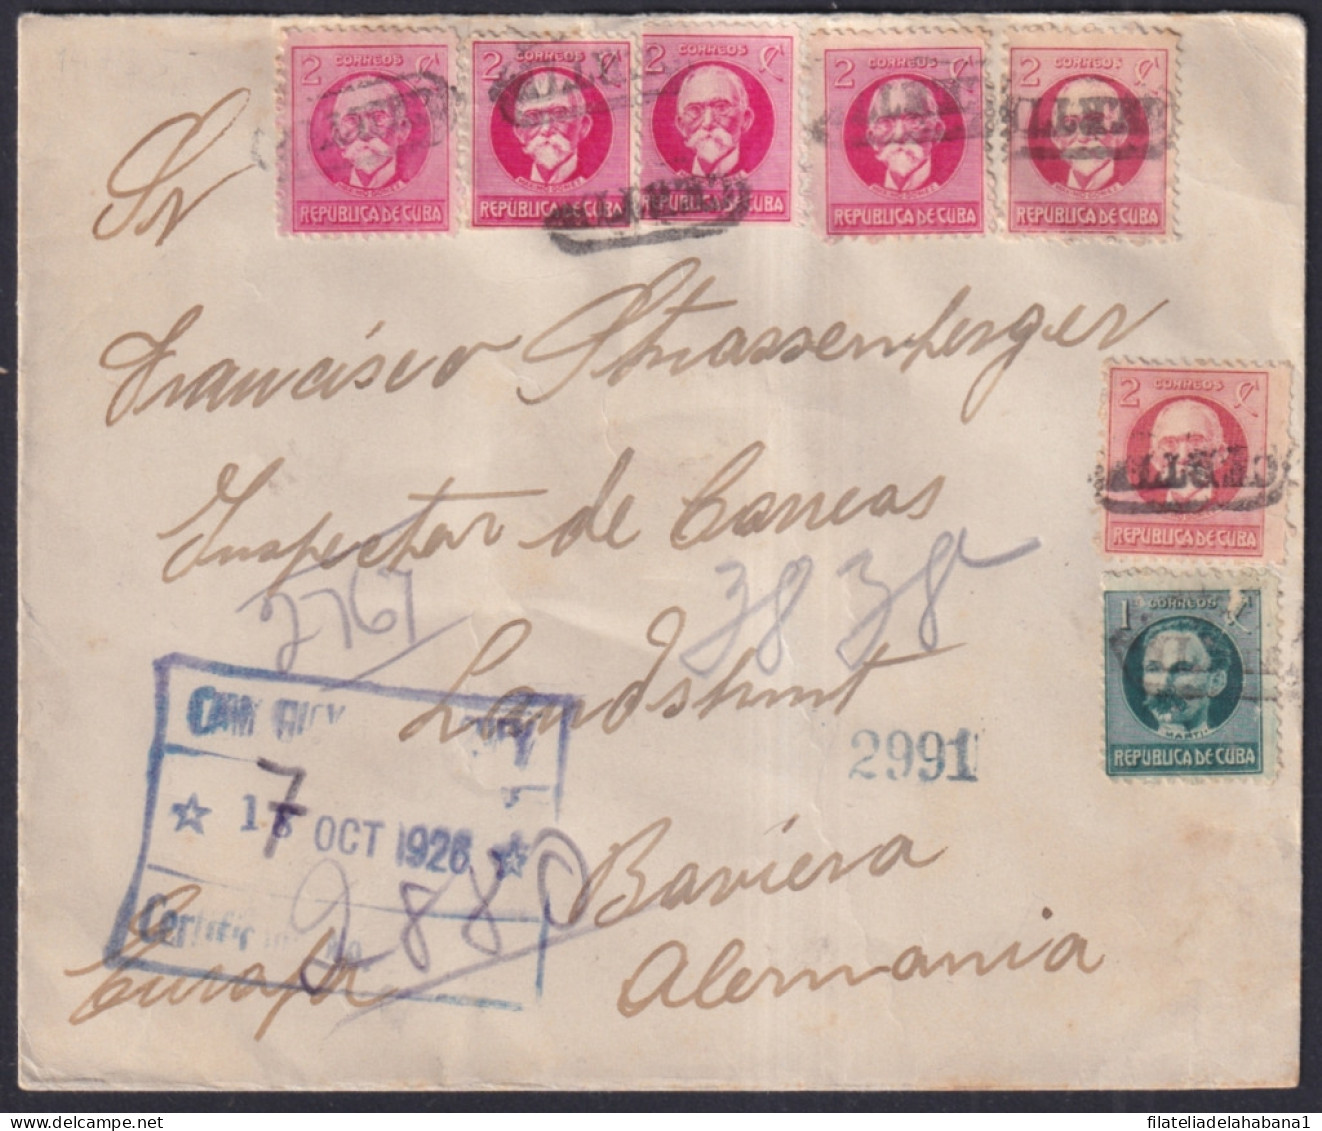 1917-H-427 CUBA REPUBLICA 1917 CERTIF MARK REGISTED COVER CAMAGUEY TO GERMANY.  - Covers & Documents